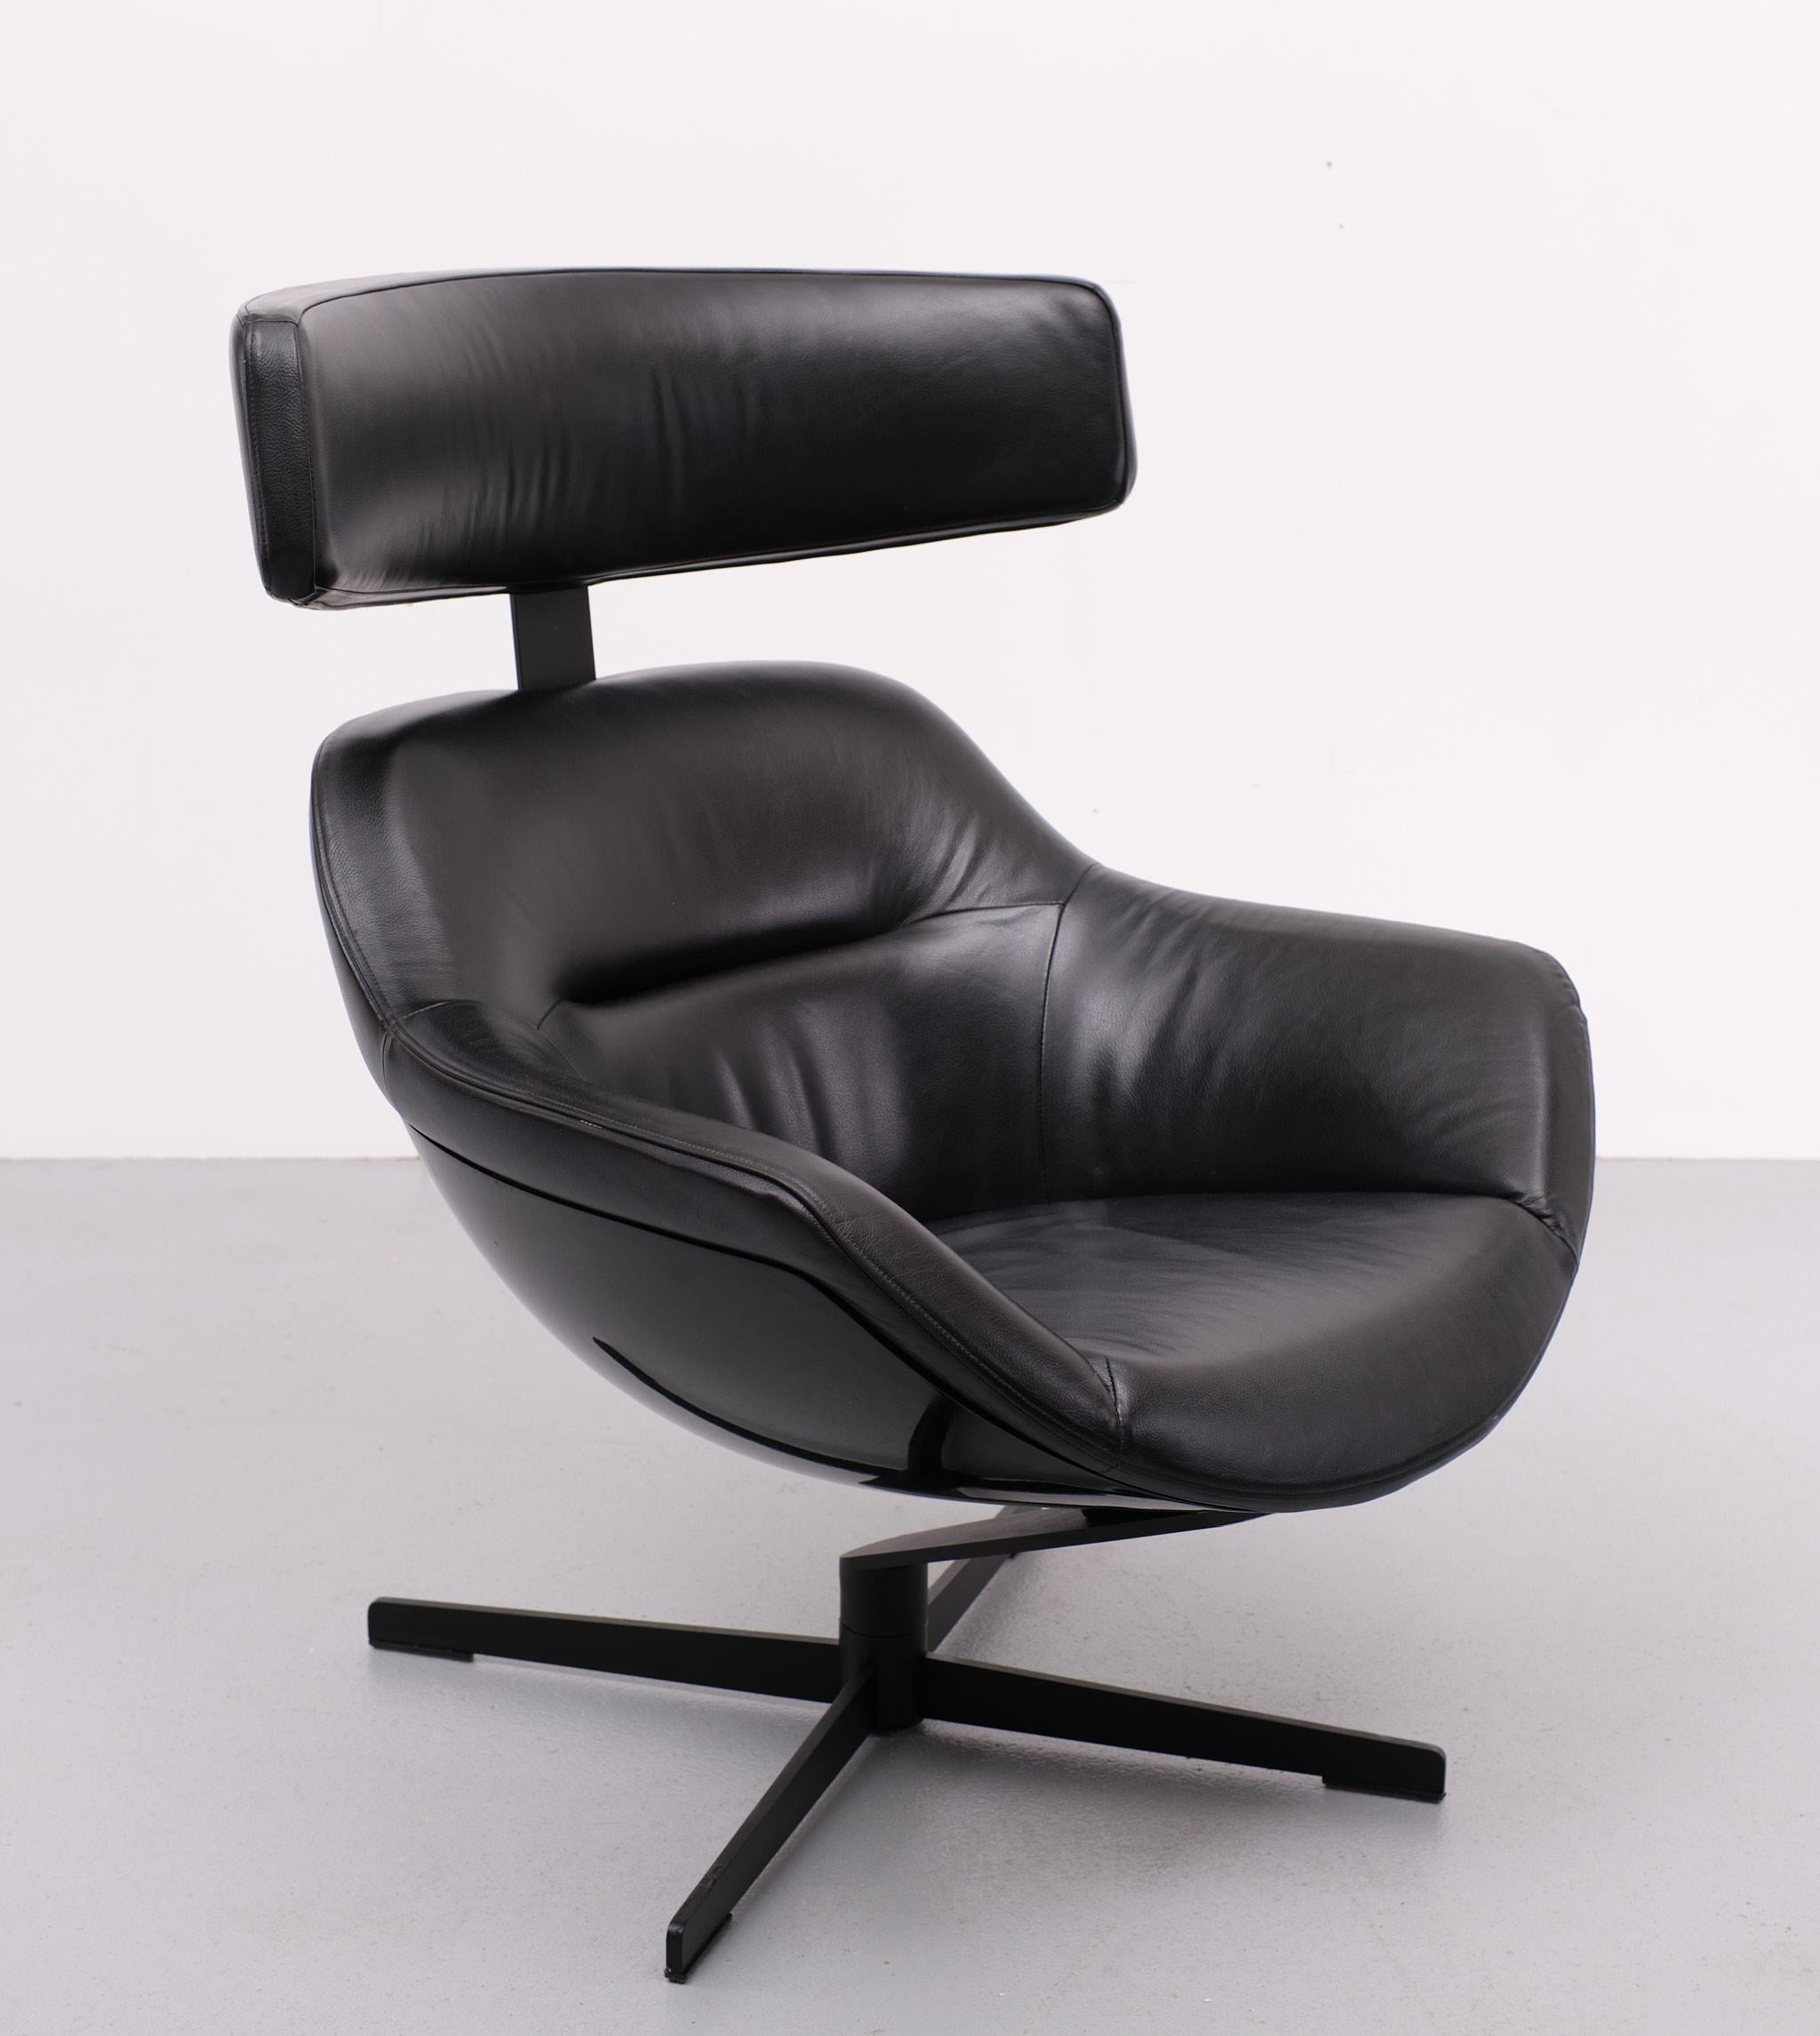 Space Age  The 277 Auckland Lounge chair  Designed by Jean Marie Massaud  for  Cassina 